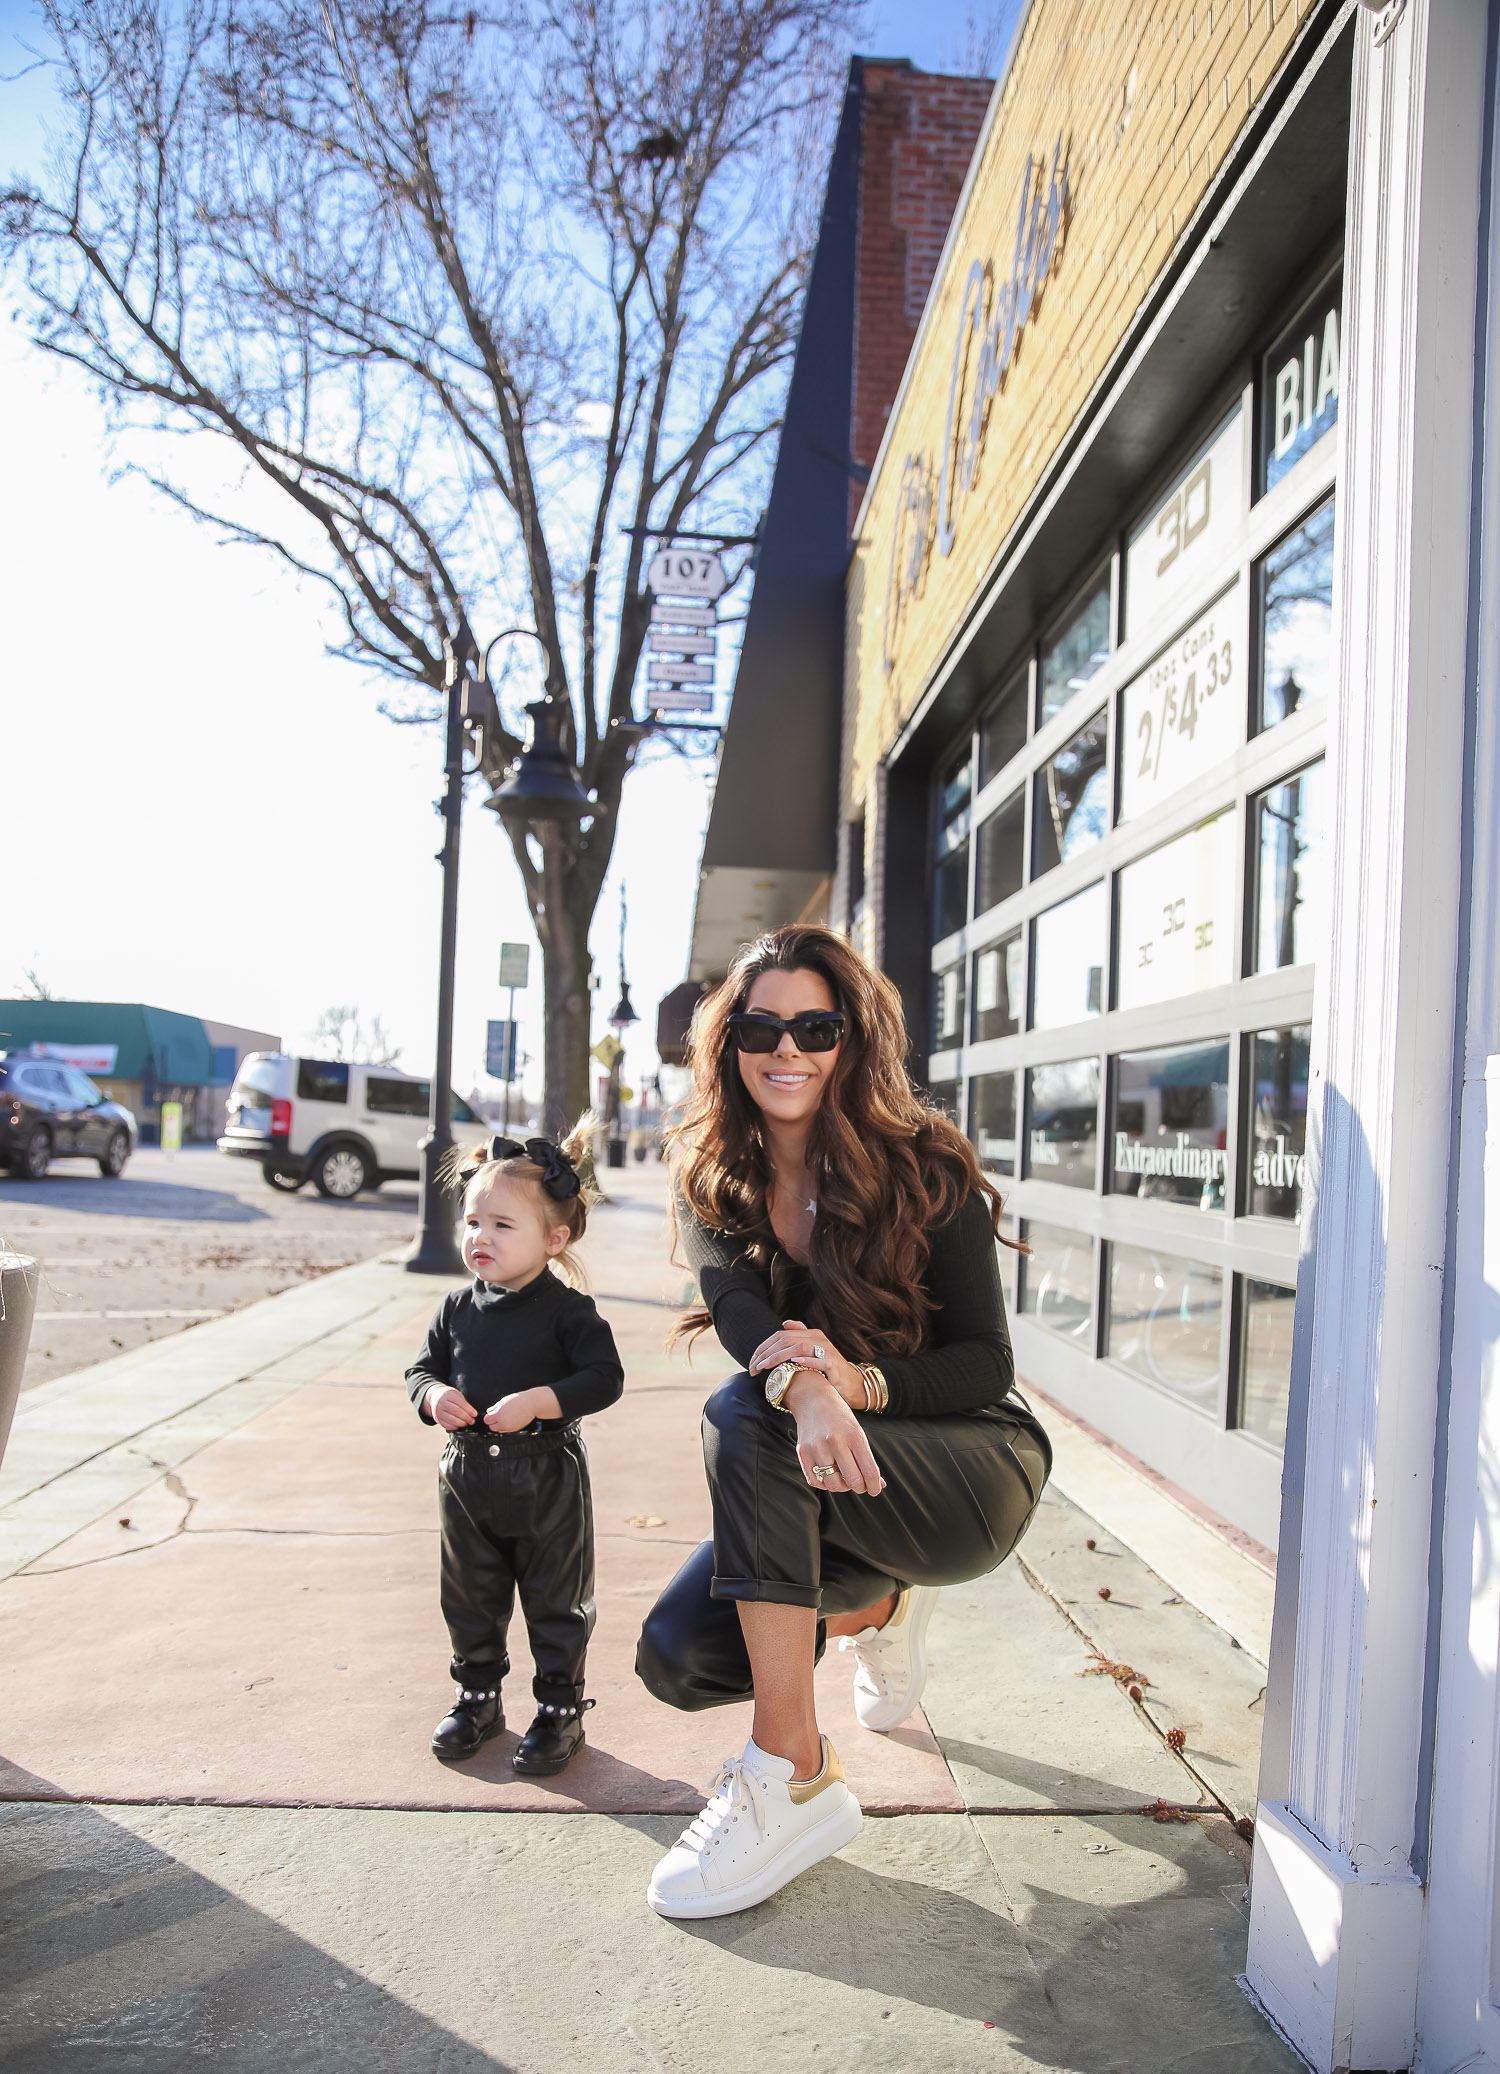 Nordstrom BP faux leather pants, loewe sunglasses, Alexander mcqueen sneakers gold white outfit pinterest, matching mommy daughter fashion, emily gemma |Mommy and Daughter by popular US fashion blog, The Sweetest Thing: image of a woman and her daughter walking together outside and wearing a pair of BP faux leather pants, Good American top, loewe sunglasses, Alexander mcqueen sneakers, Monica Vinader ring, Nadri bracelet, Nadri earrings, and Rolex watch.